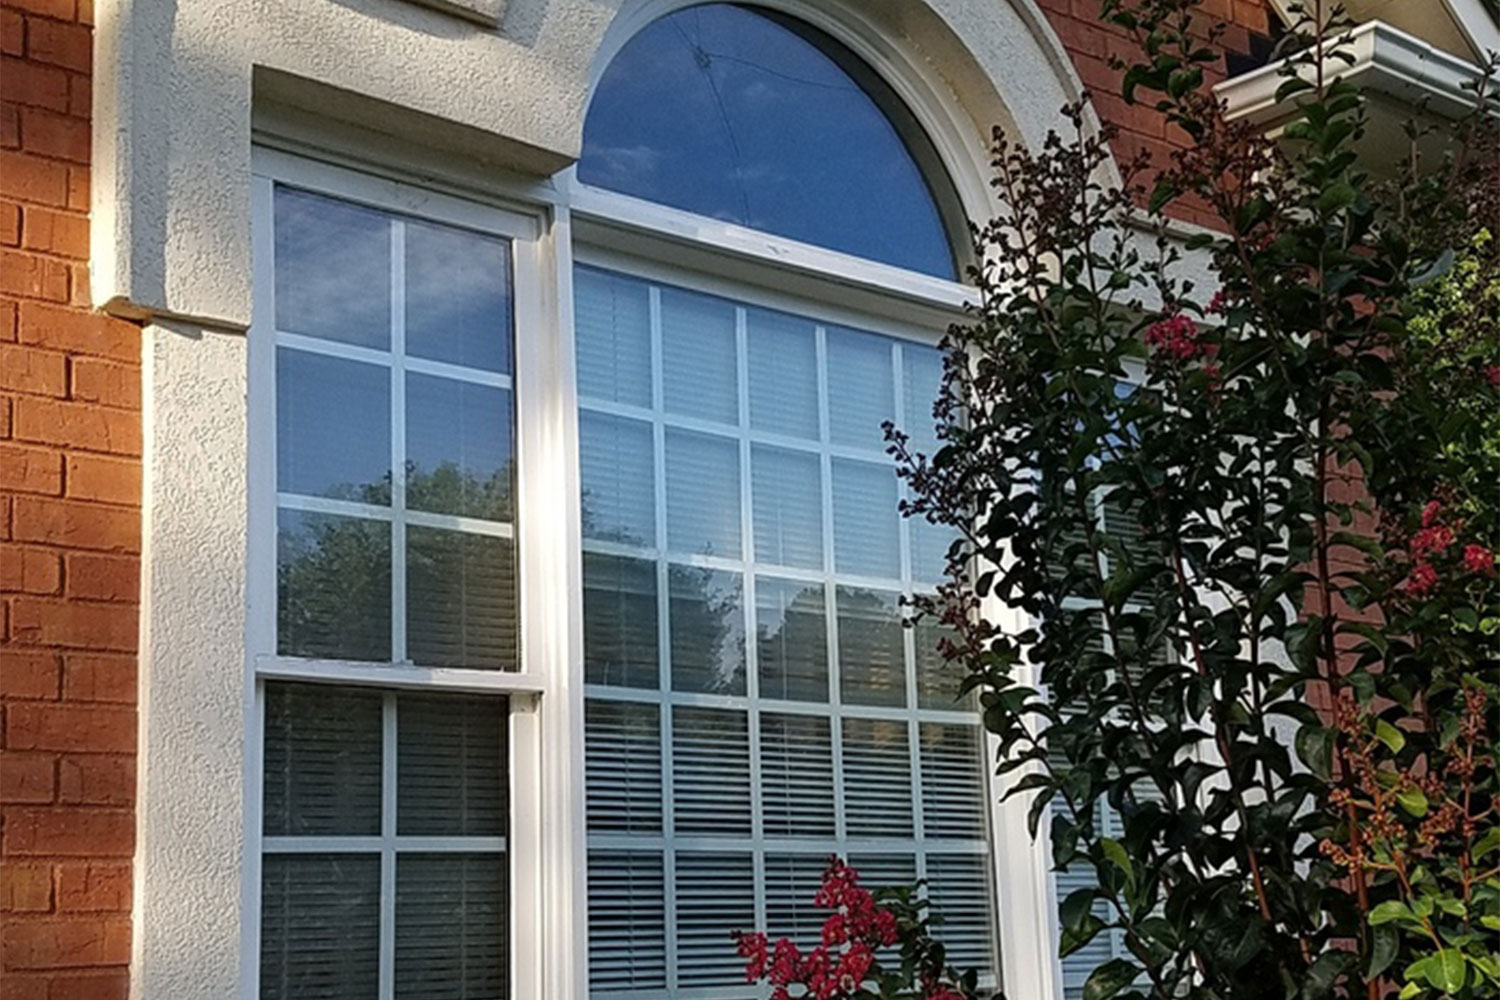 A window with an arch design